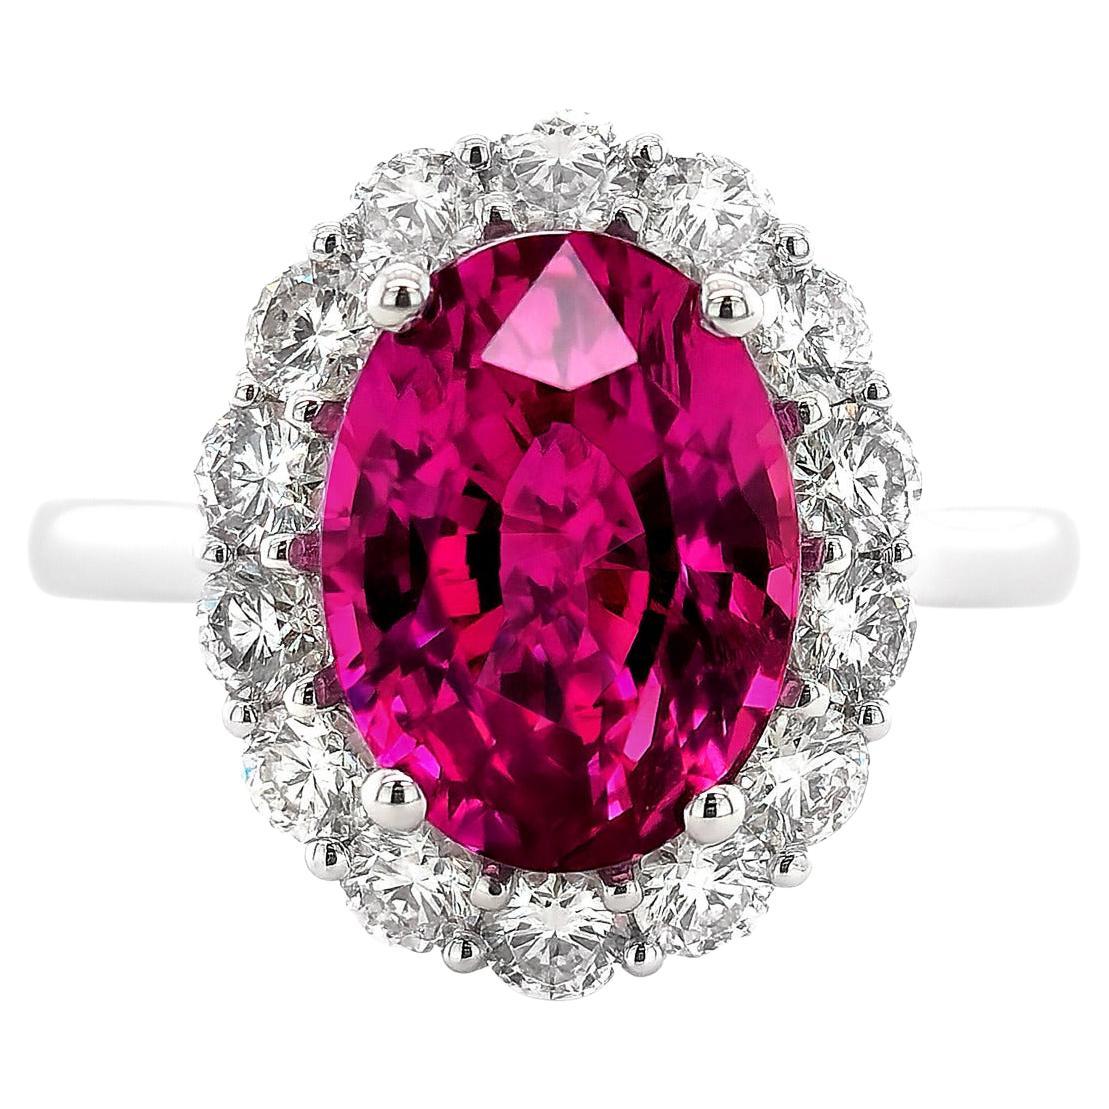 GIA Certified 5.34 Carat Madagascar Pink Sapphire Diamond 18k White Gold Ring For Sale